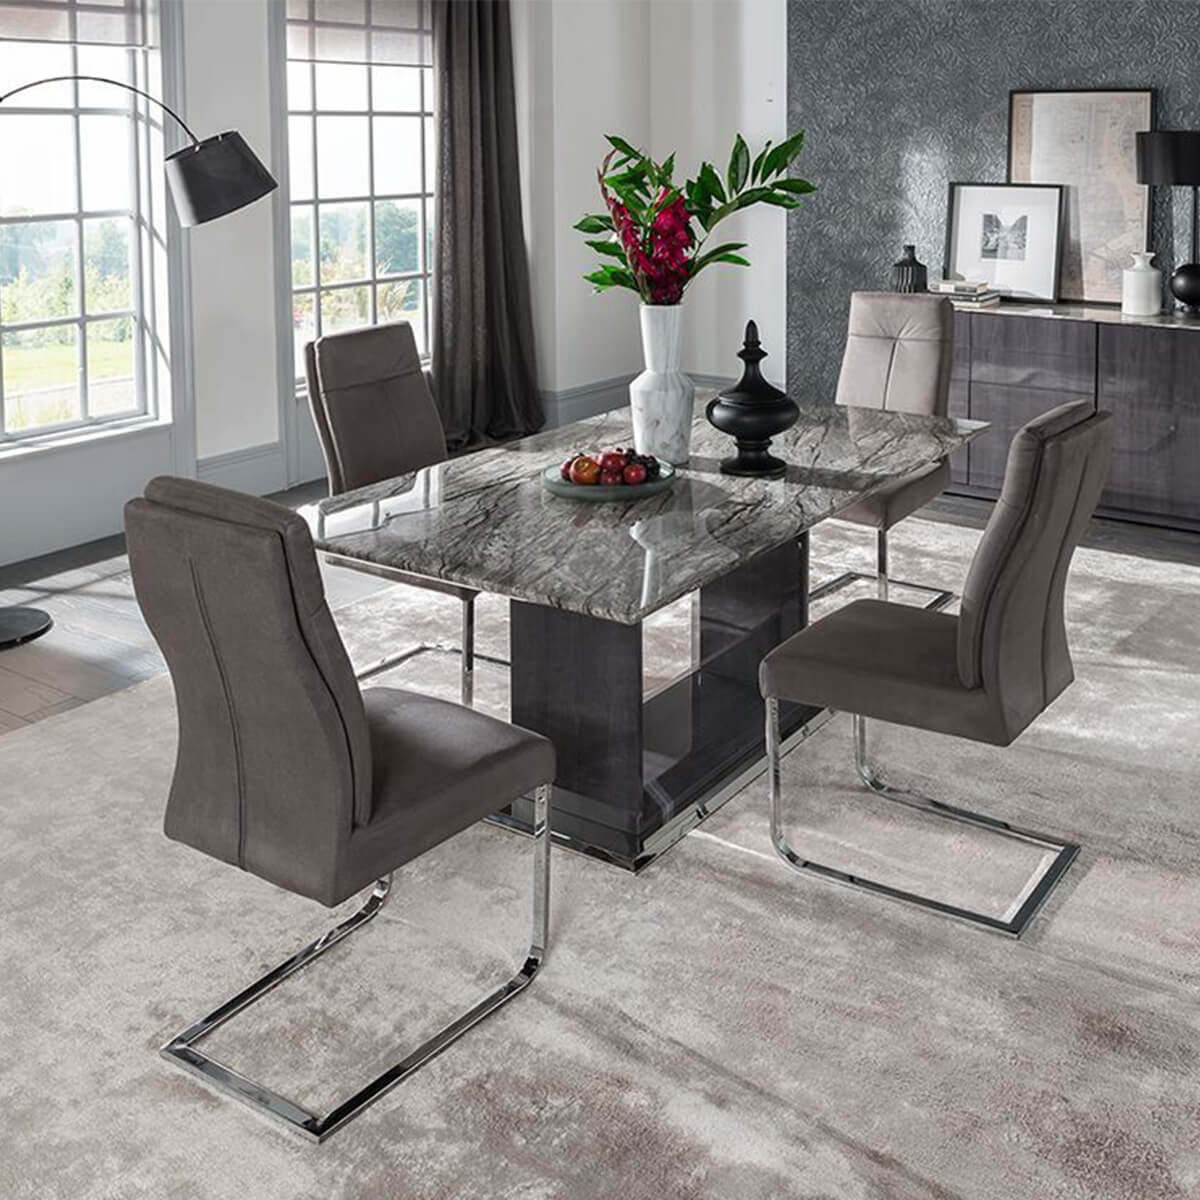 Rina Marble Dining Table Set With Chairs inside dimensions 1200 X 1200